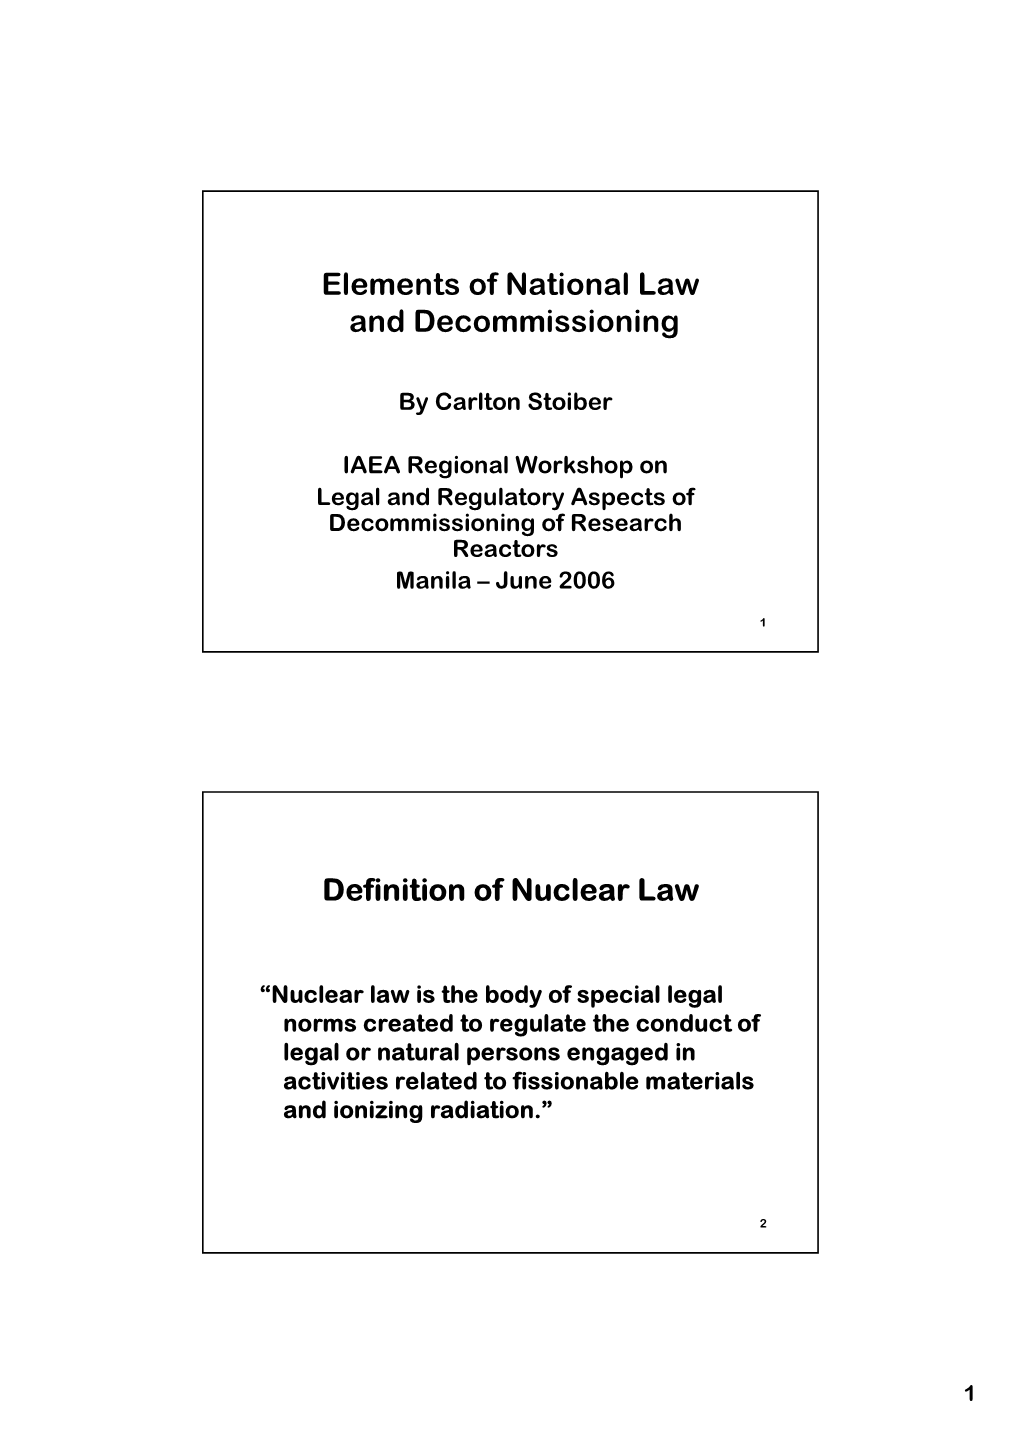 Decommiss & Nuclear Law Elements